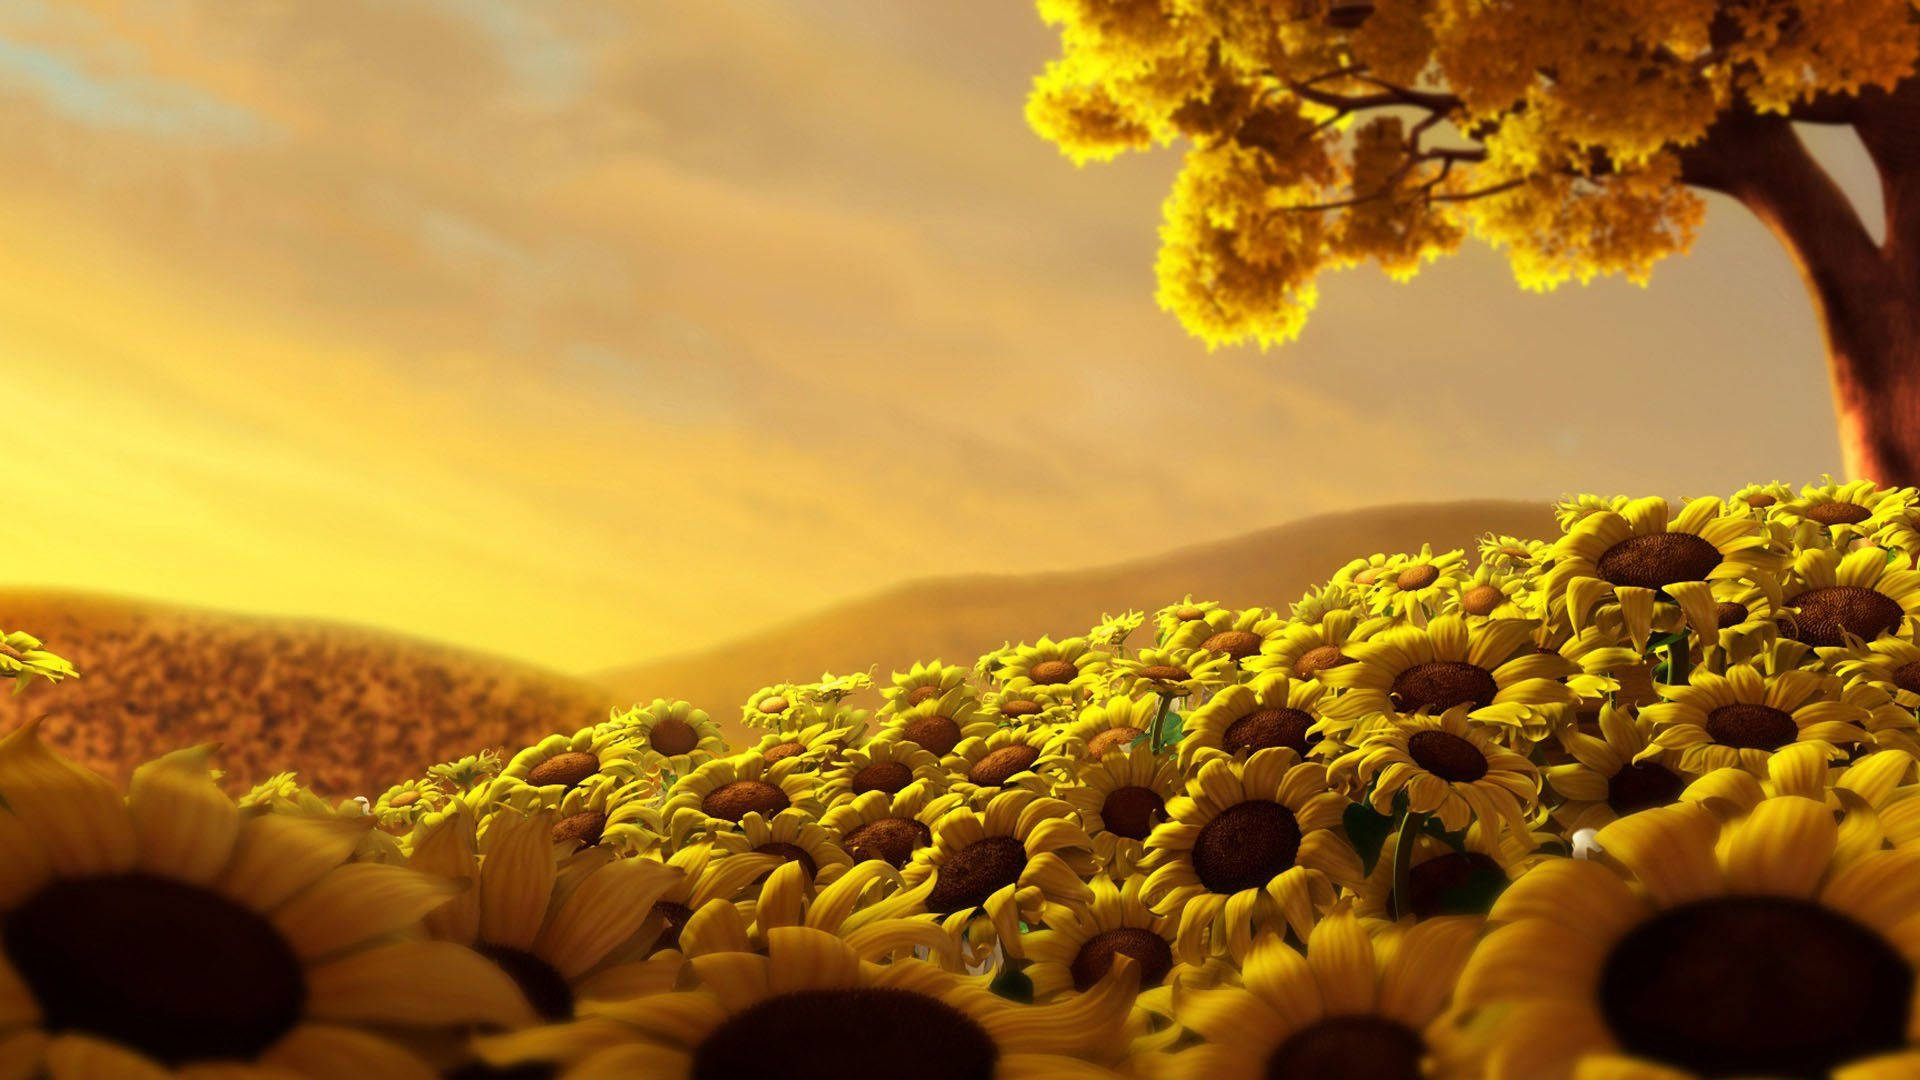 Begin your day with the sun by taking a peaceful stroll through the sunflower field Wallpaper